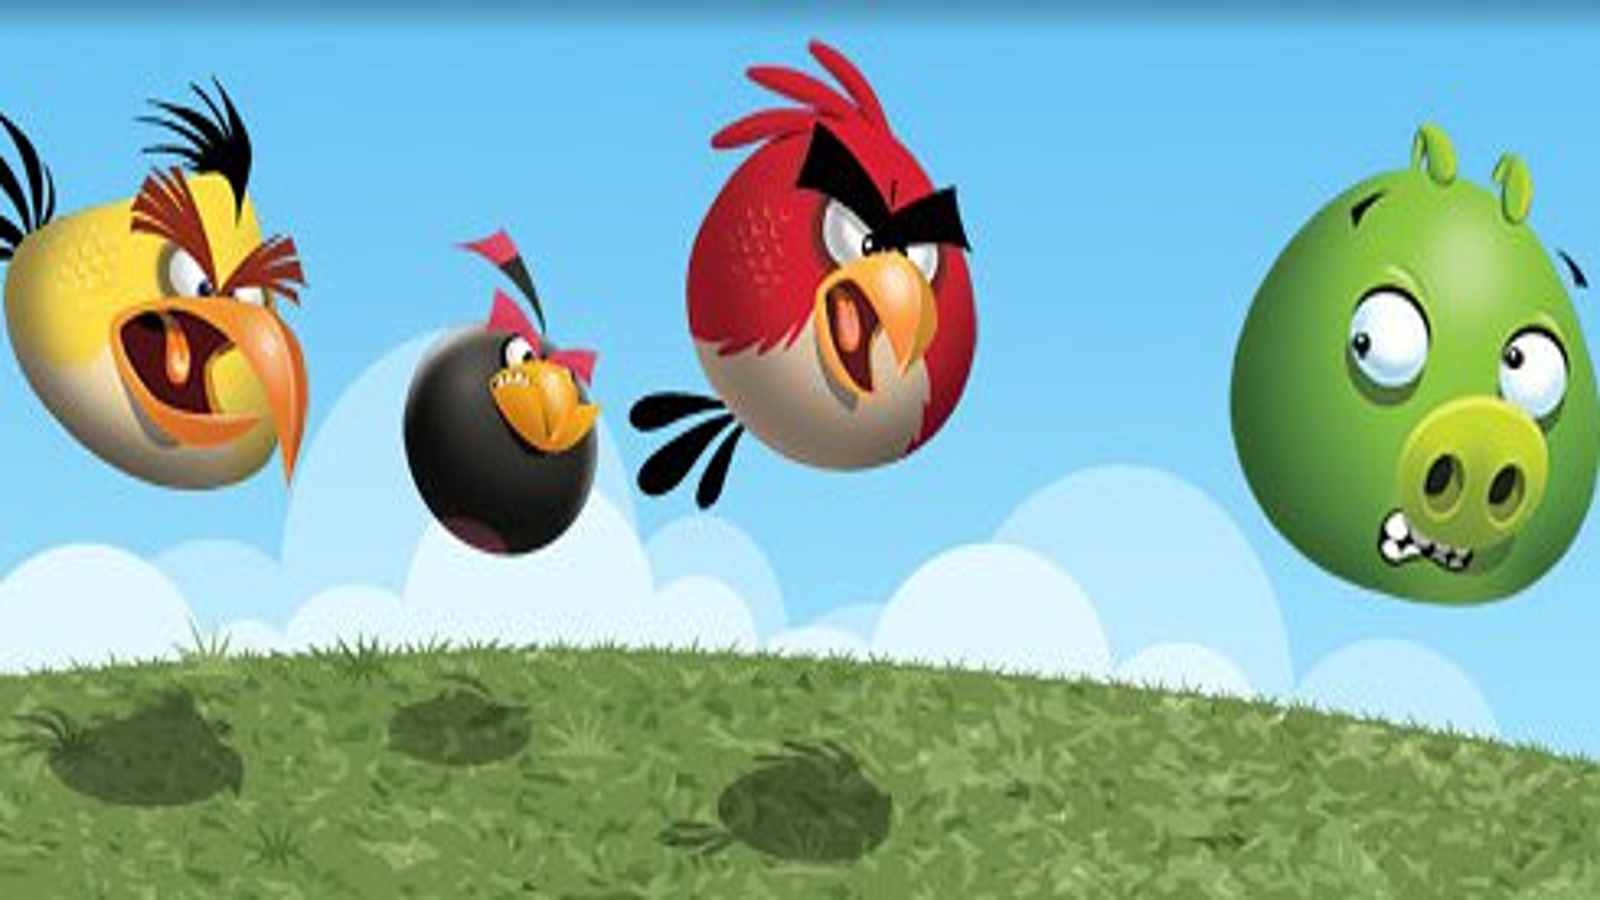 roblox wallpaper,angry birds,games,pc game,adventure game